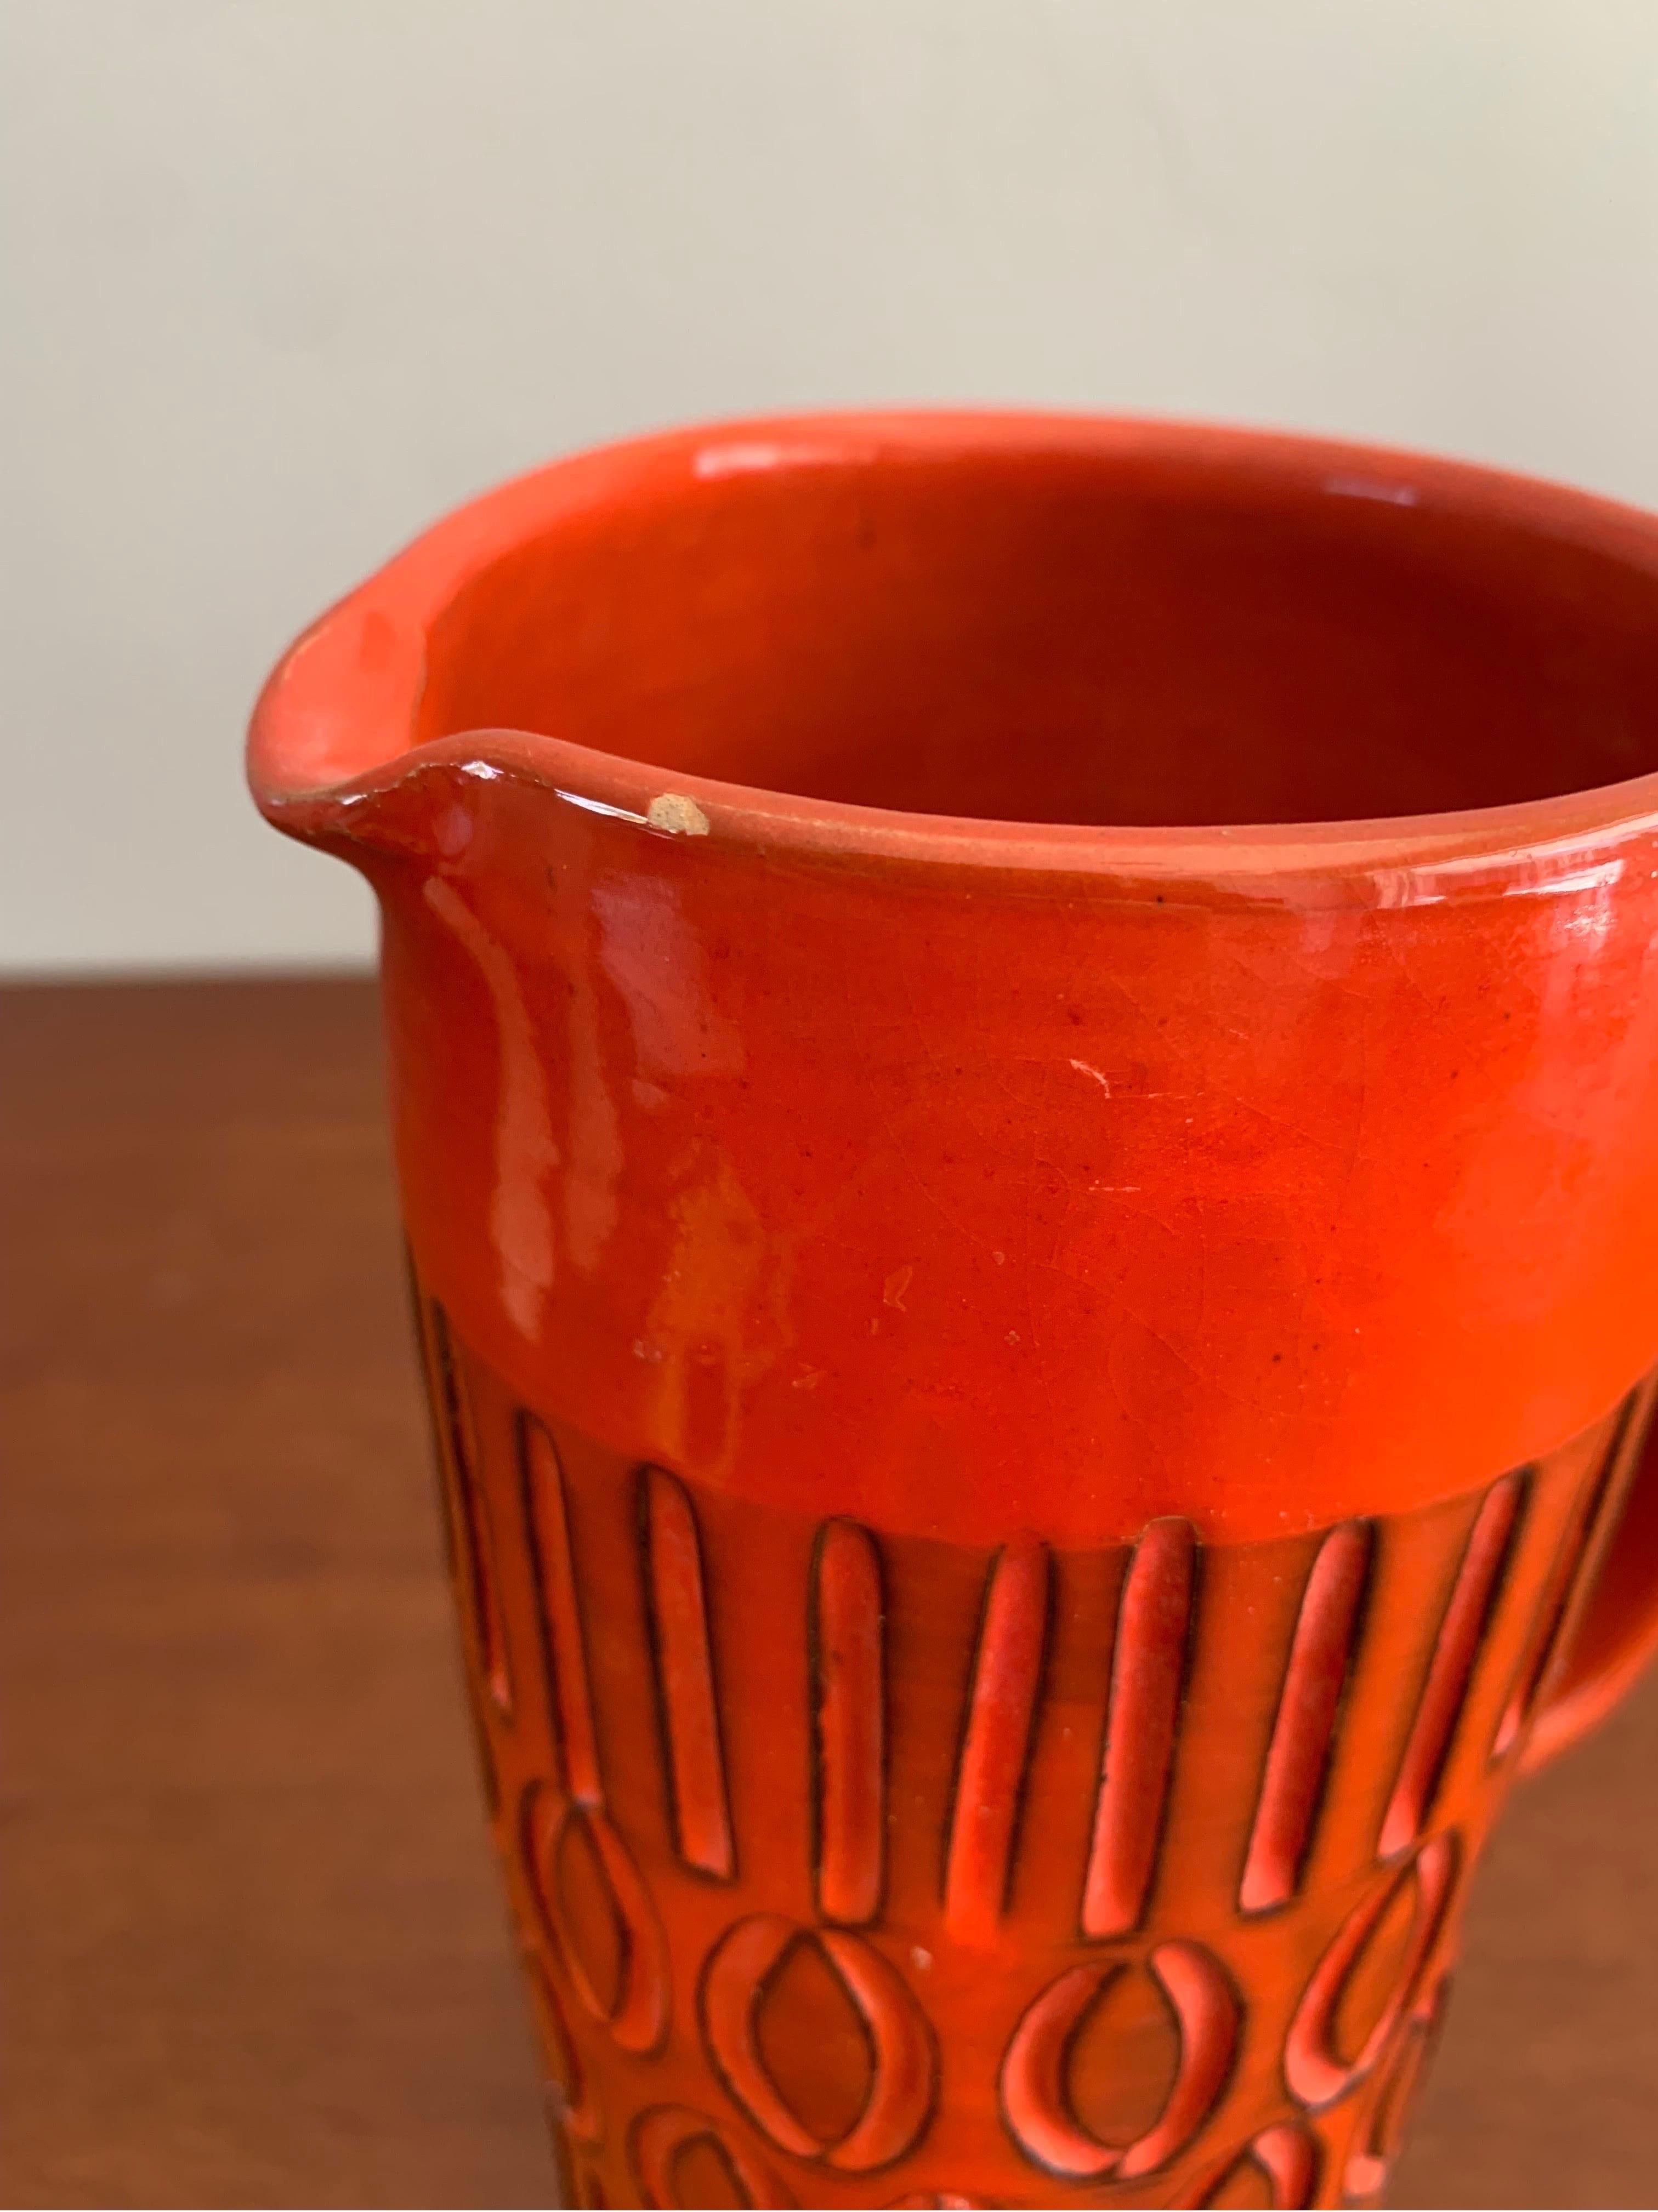 Mid-Century Modern Italian made vase. In the style and likely made by Bitossi or Alvino Bagni. 

Beautifully made with a deep dark orange red color. Would add a fun pop of color to any dining setting or used as a vase in any room. 

9.5” tall 6”